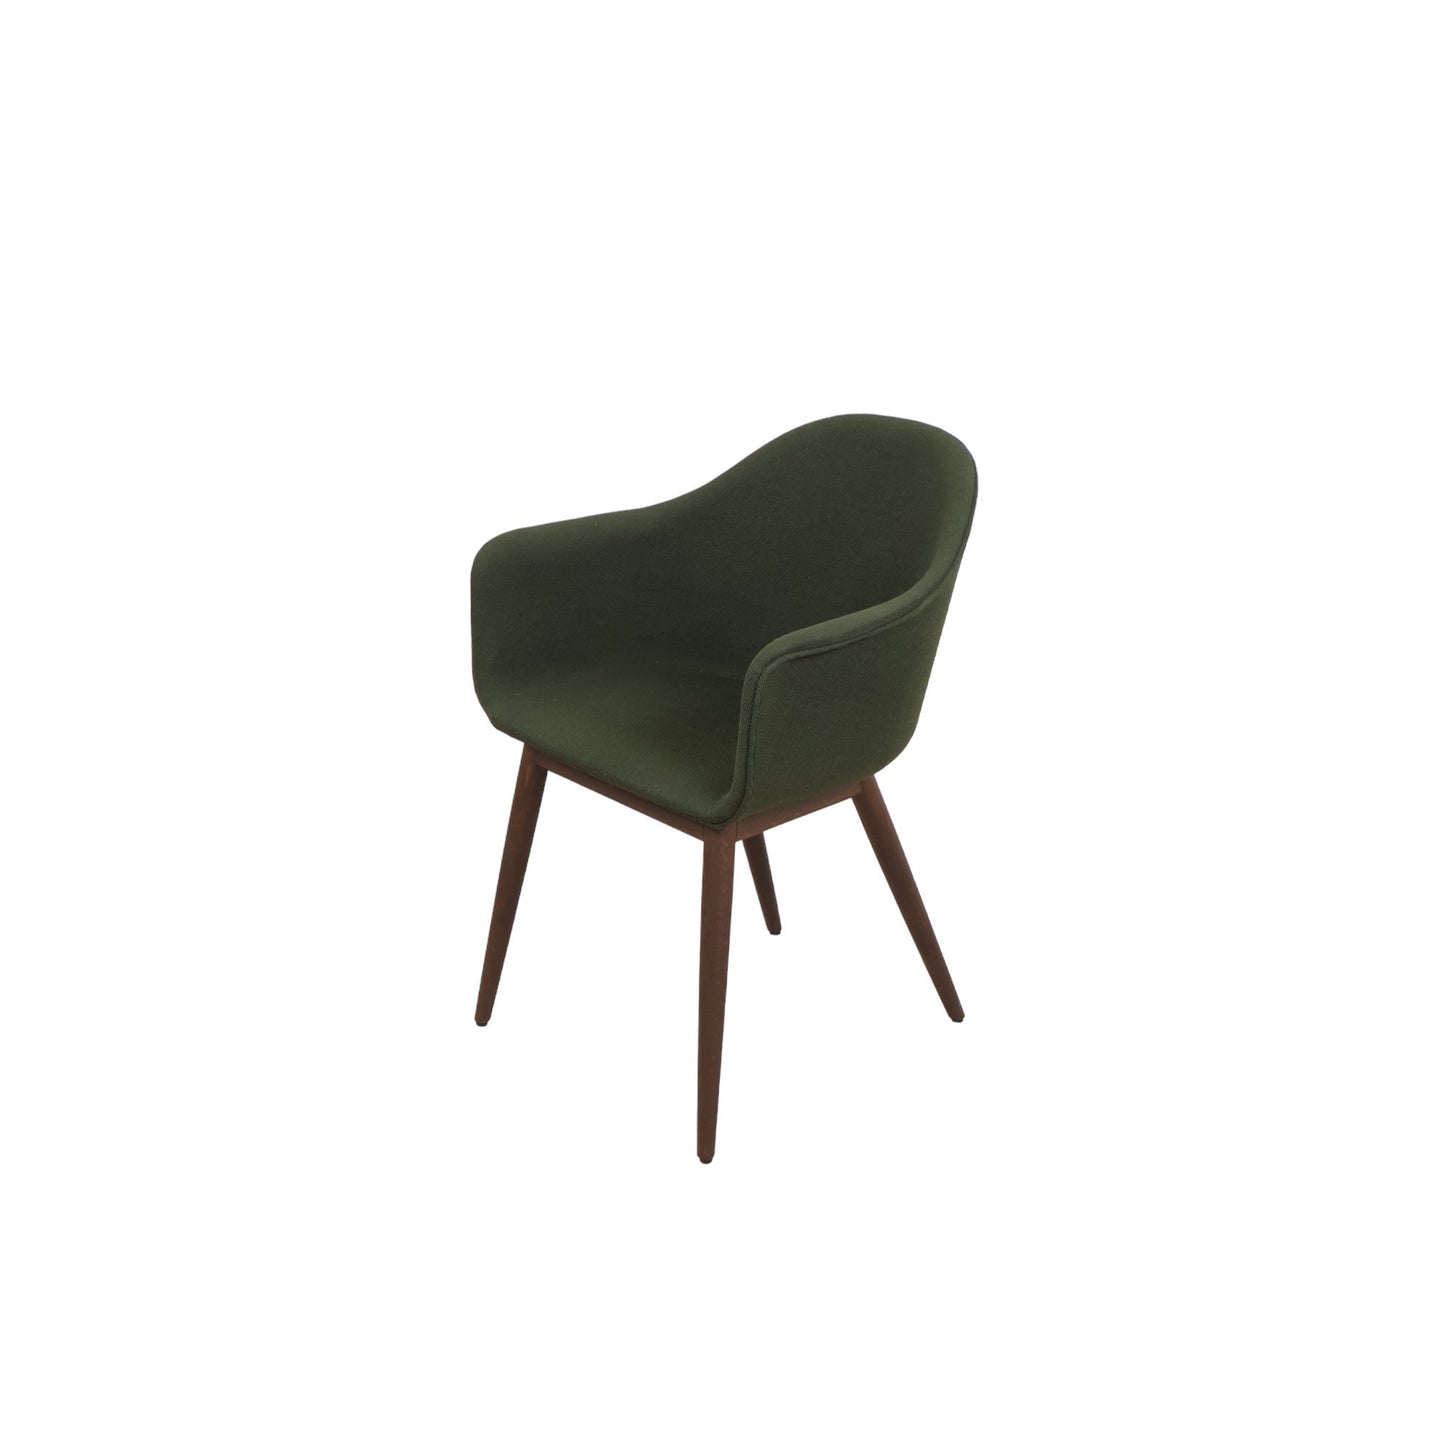 MENU Harbour Dining Chair, Wooden Base, upholstered